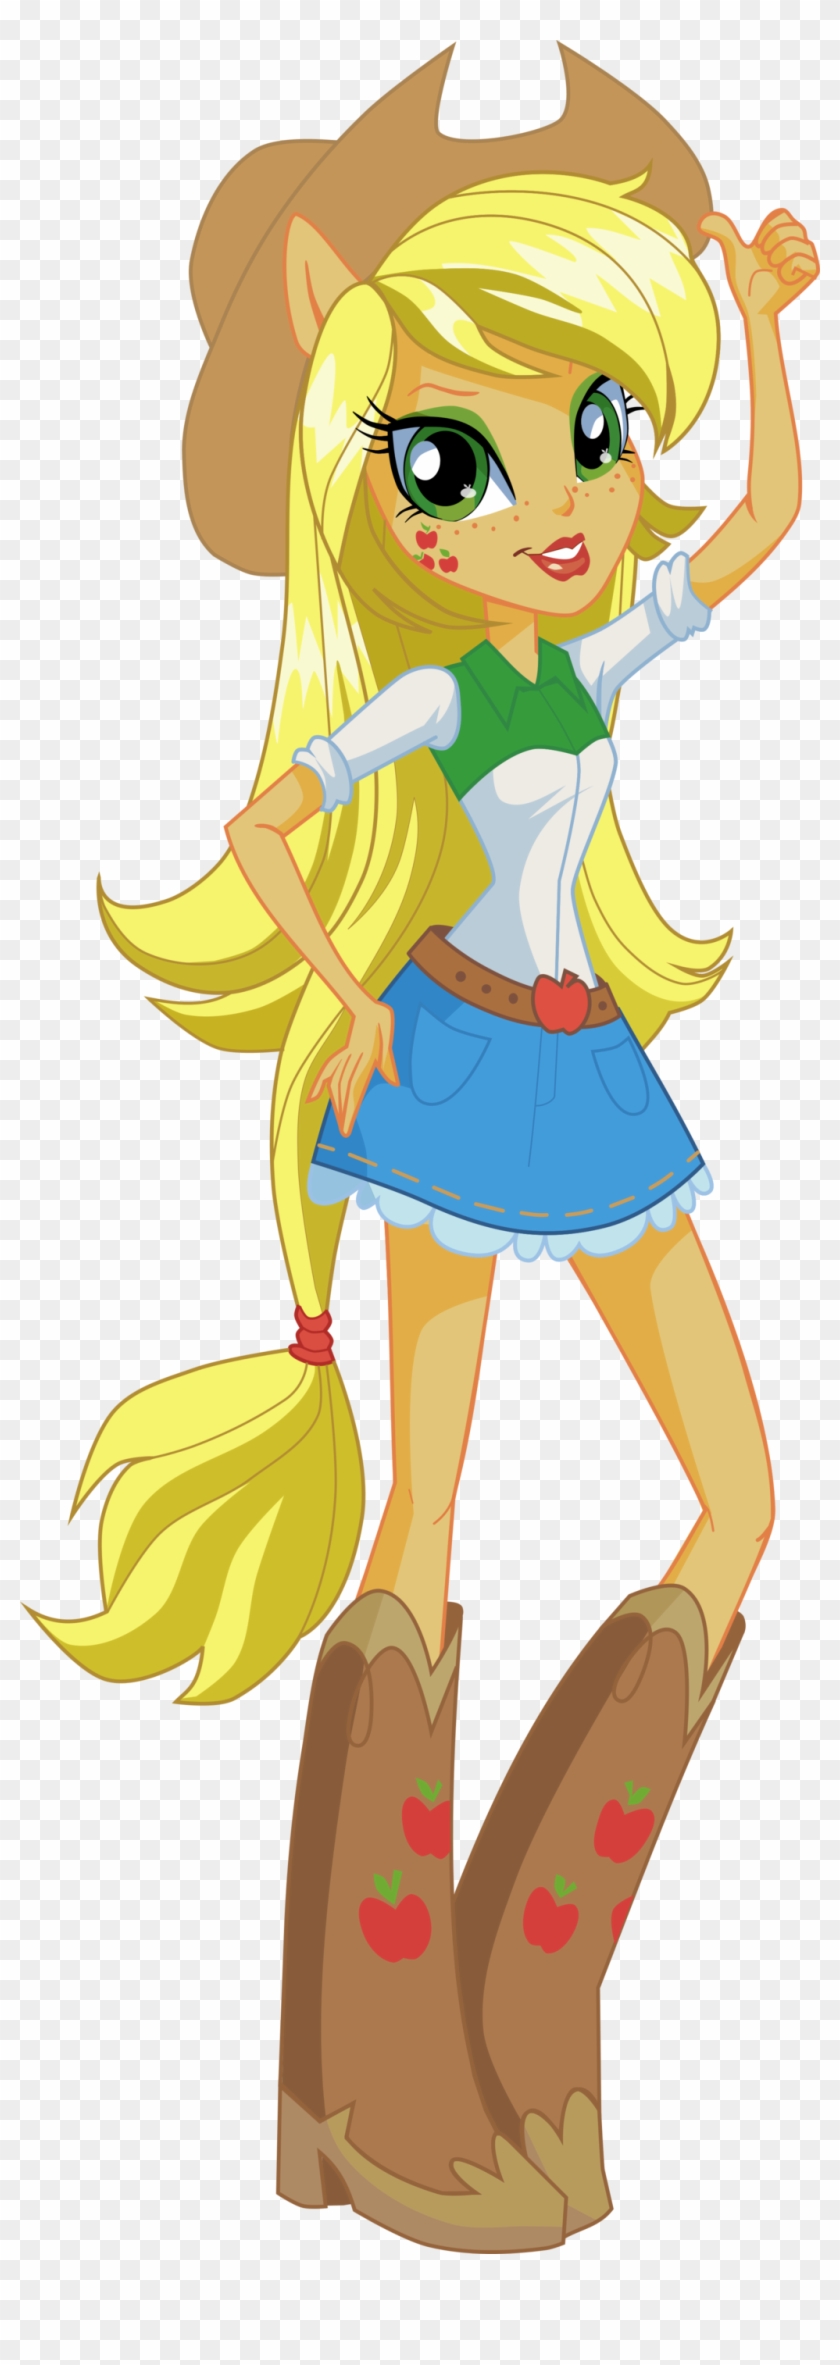 Vector Equestria Girls Box Apple Jack By Will290590 - Apple Jack Equestria Girl #770238